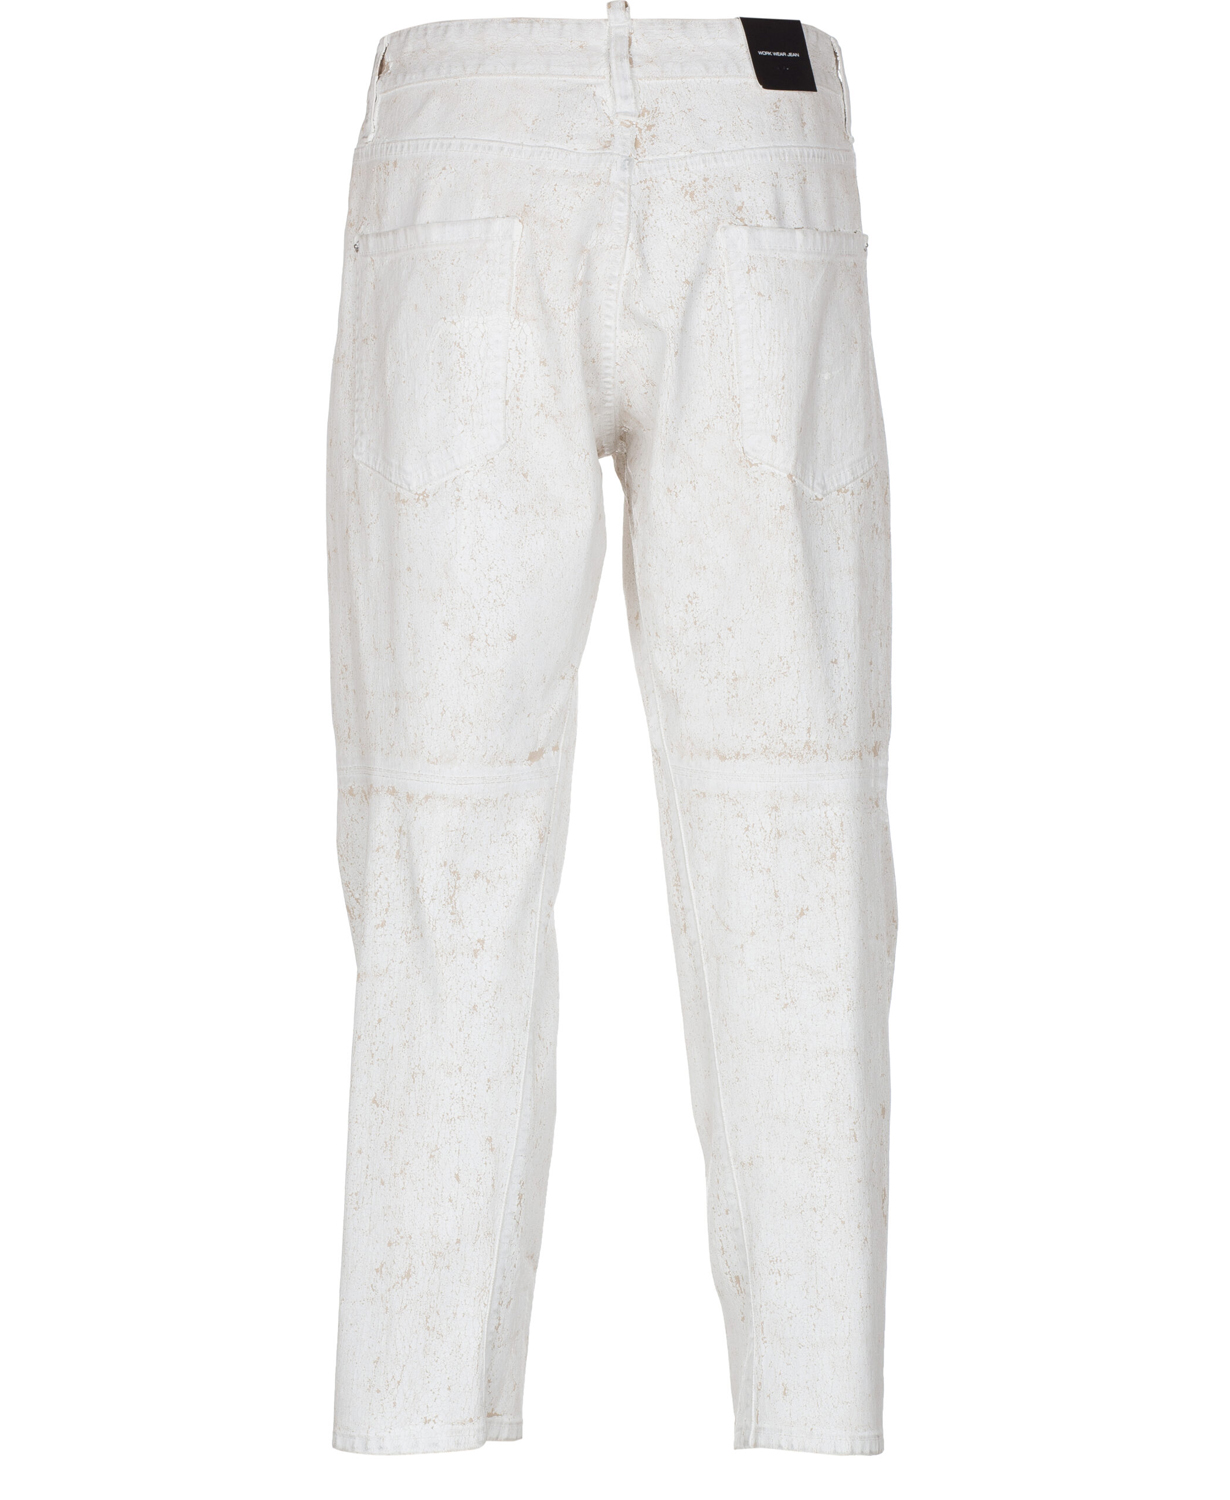 www.couturepoint.com-dsquared2-mens-work-wear-jean-white-paint-dipped-distressed-jeans-pants